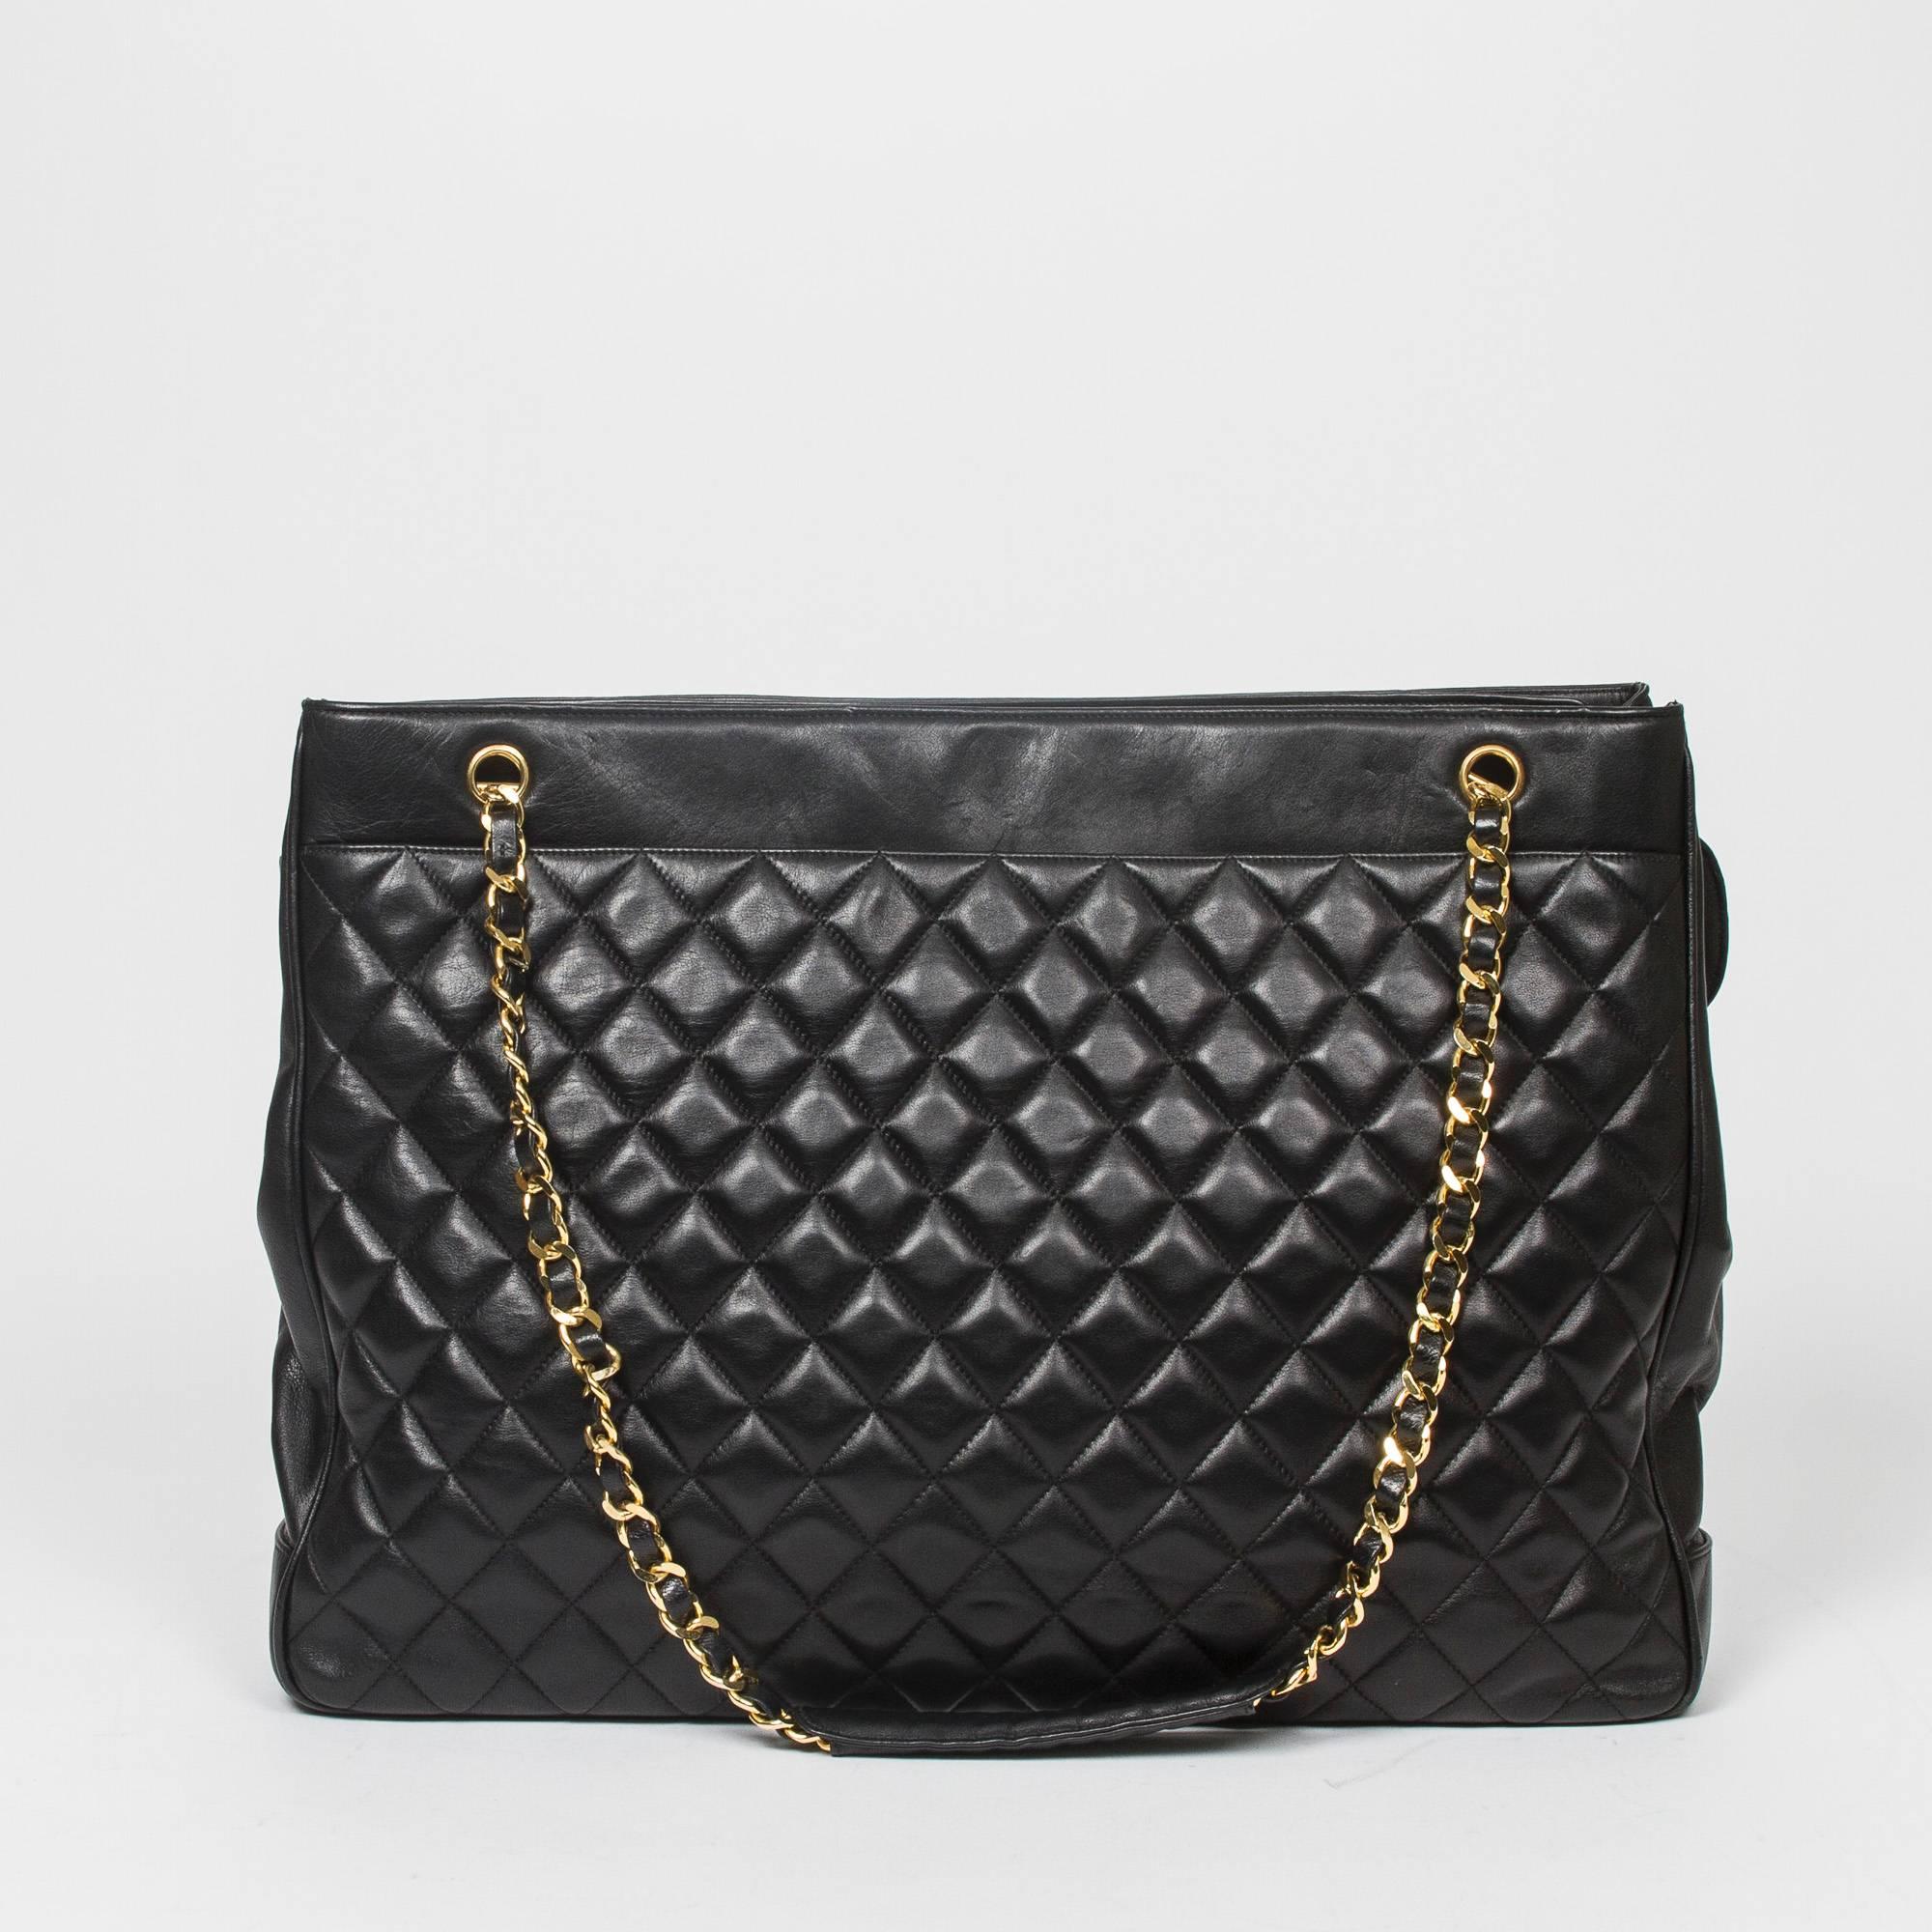 Chanel - Vintage Supermodel Tote Black Quilted Leather 1